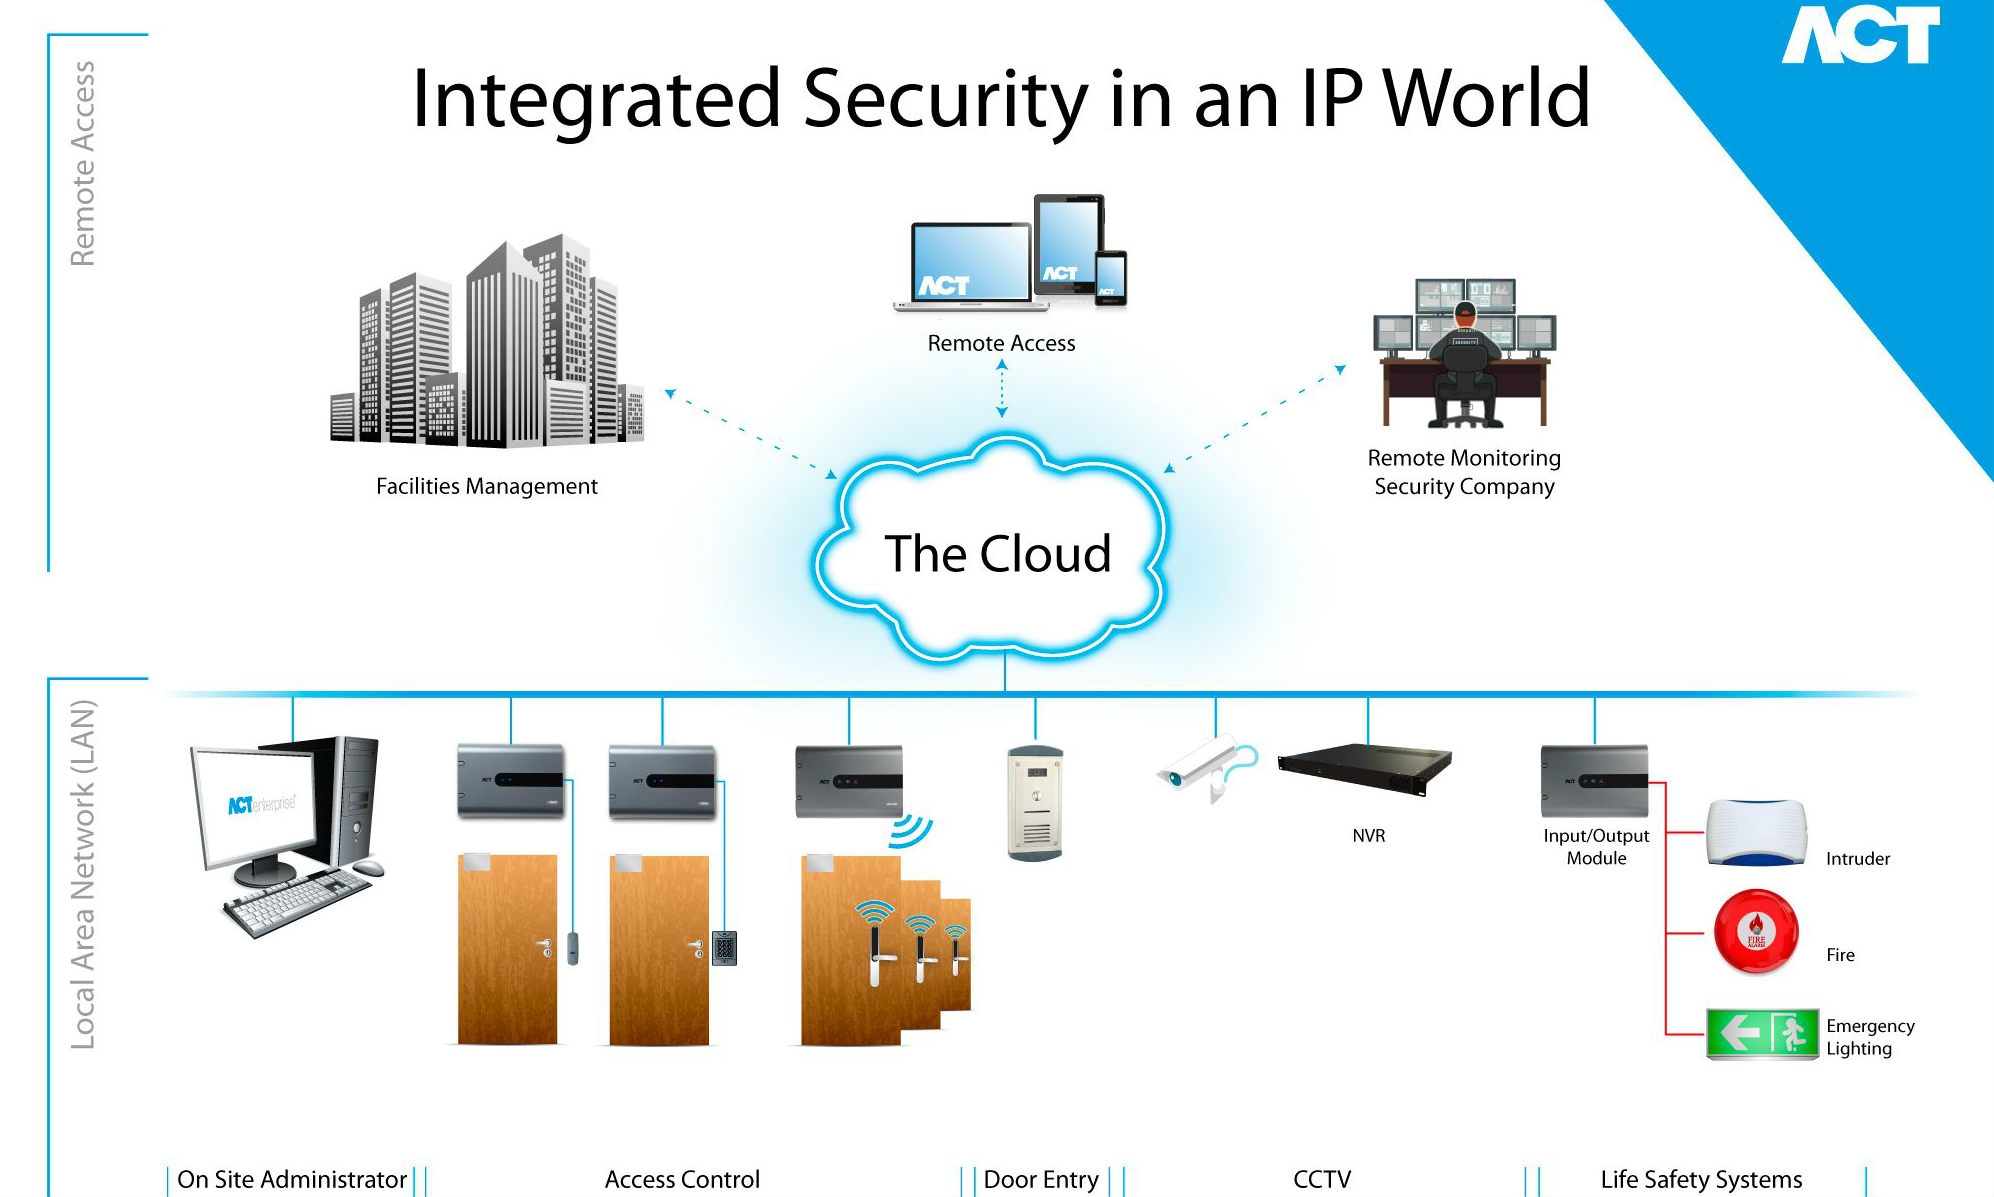 Advantages of integrated security